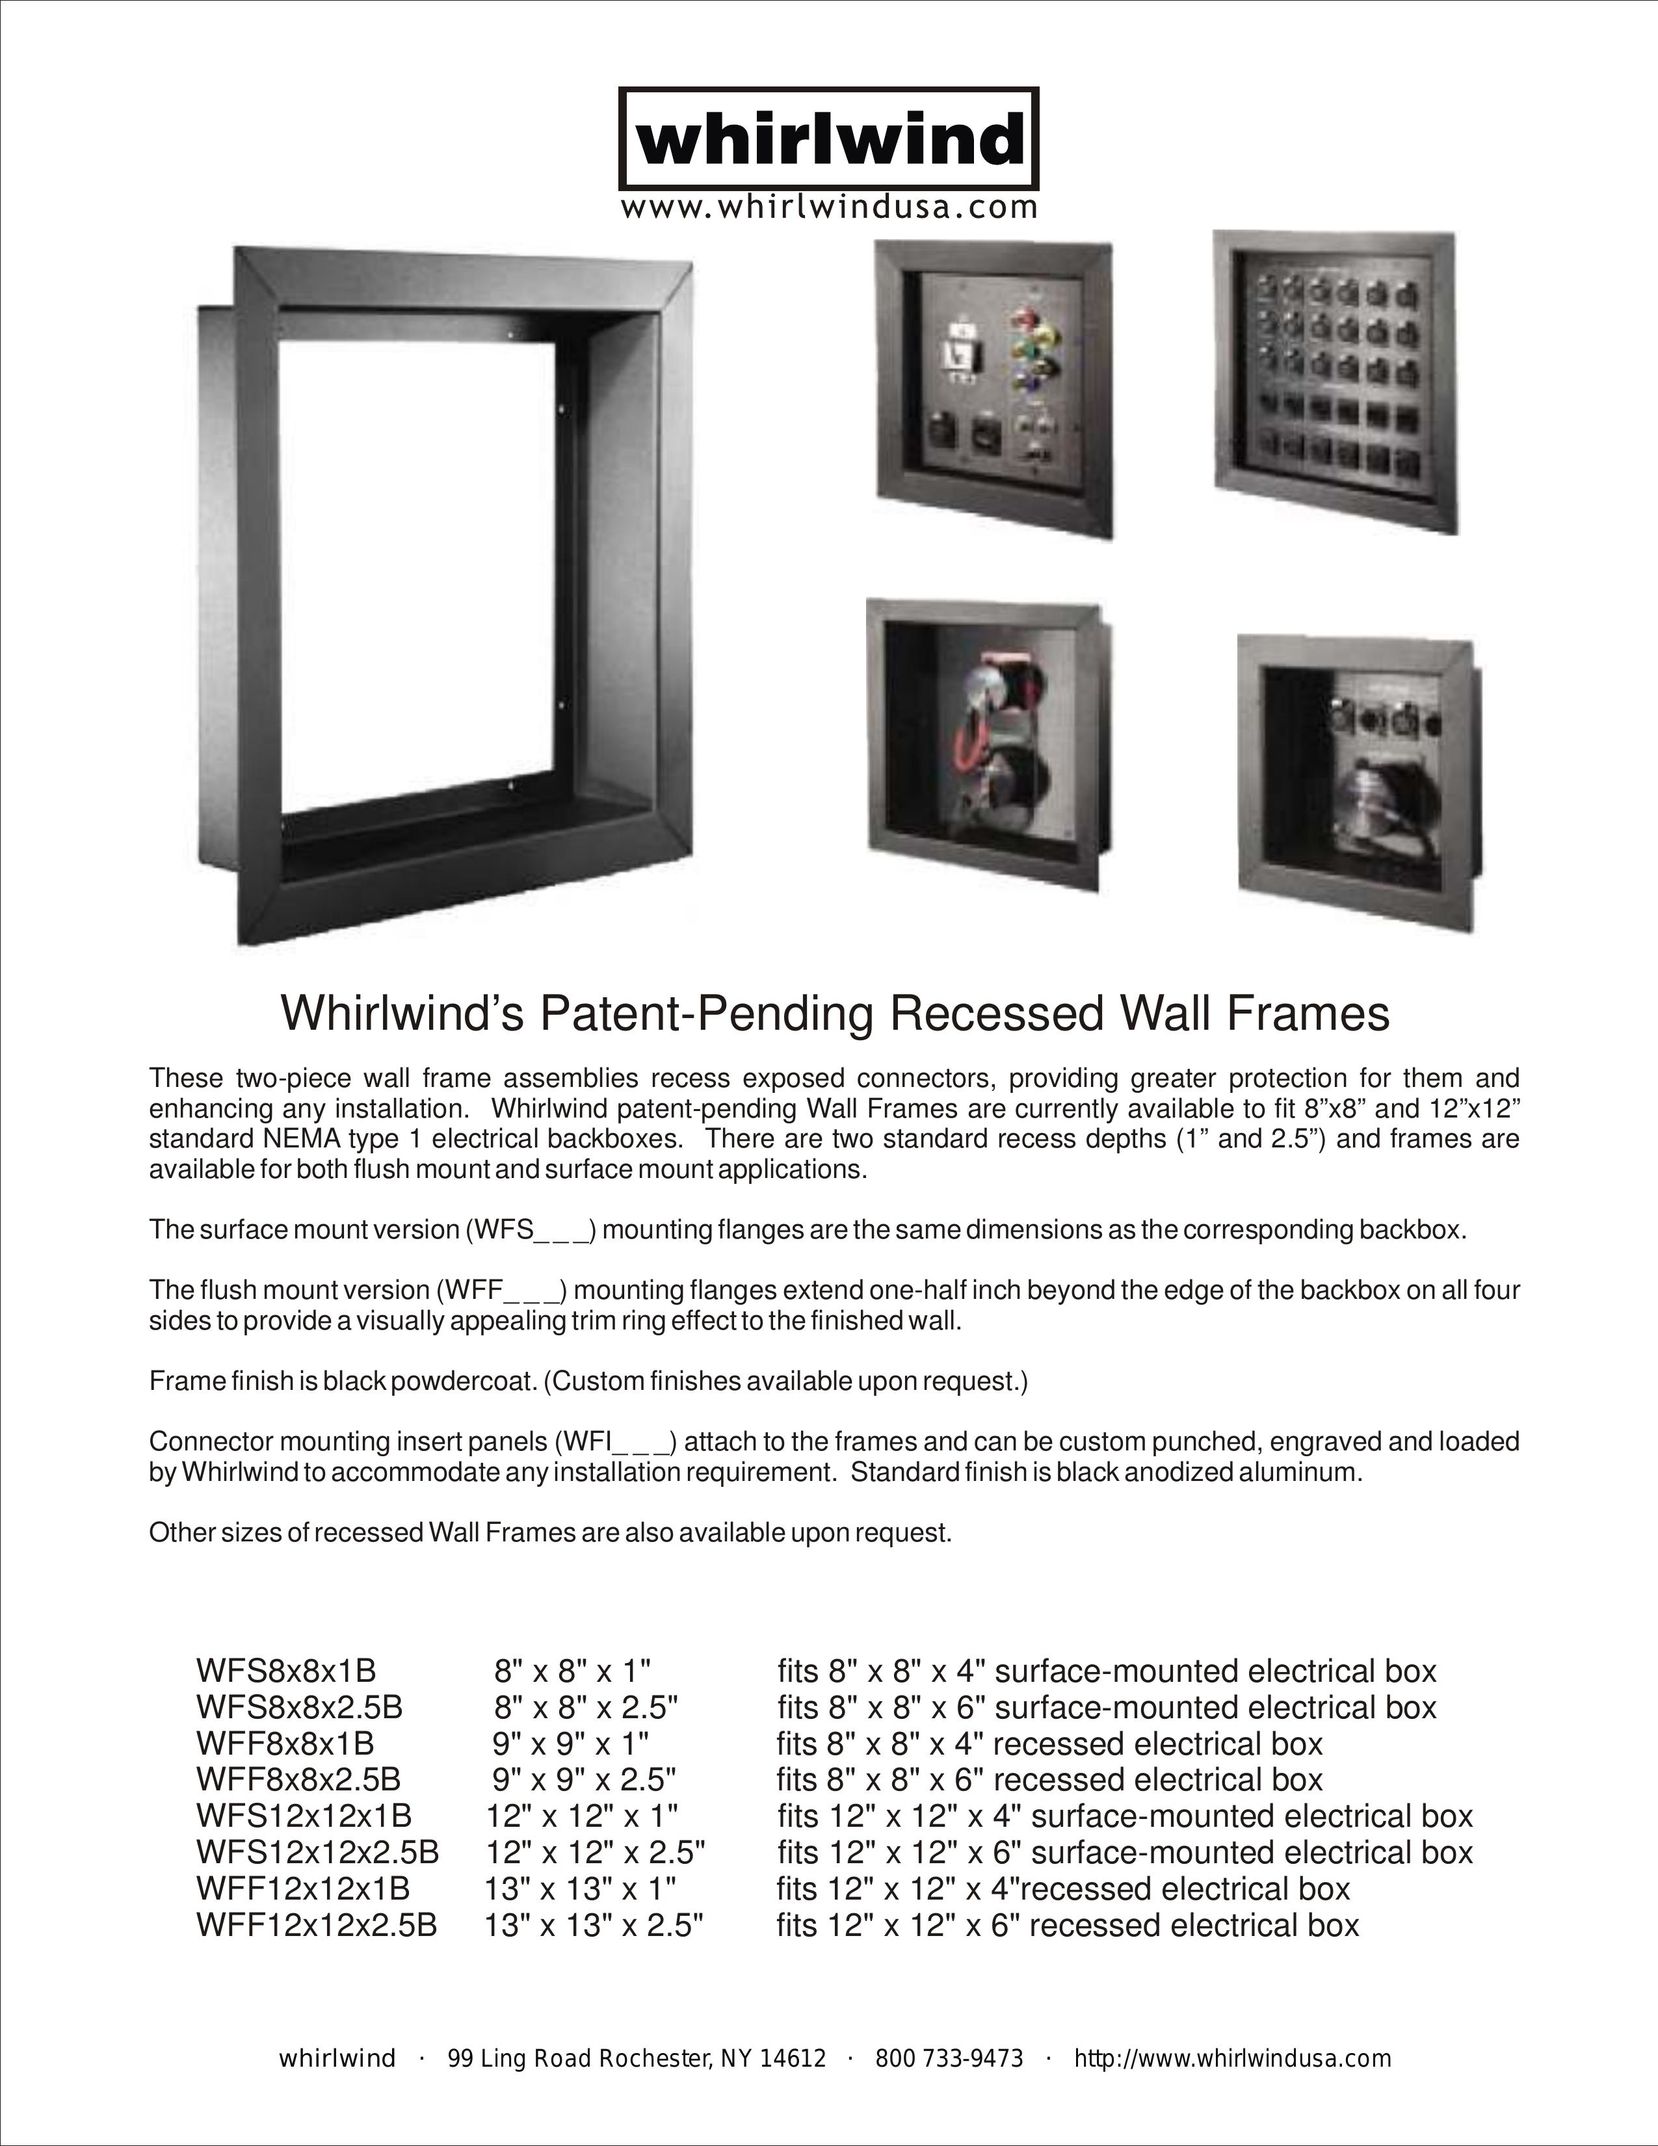 Whirlwind Patent-Pending Recessed Wall Frames Indoor Furnishings User Manual